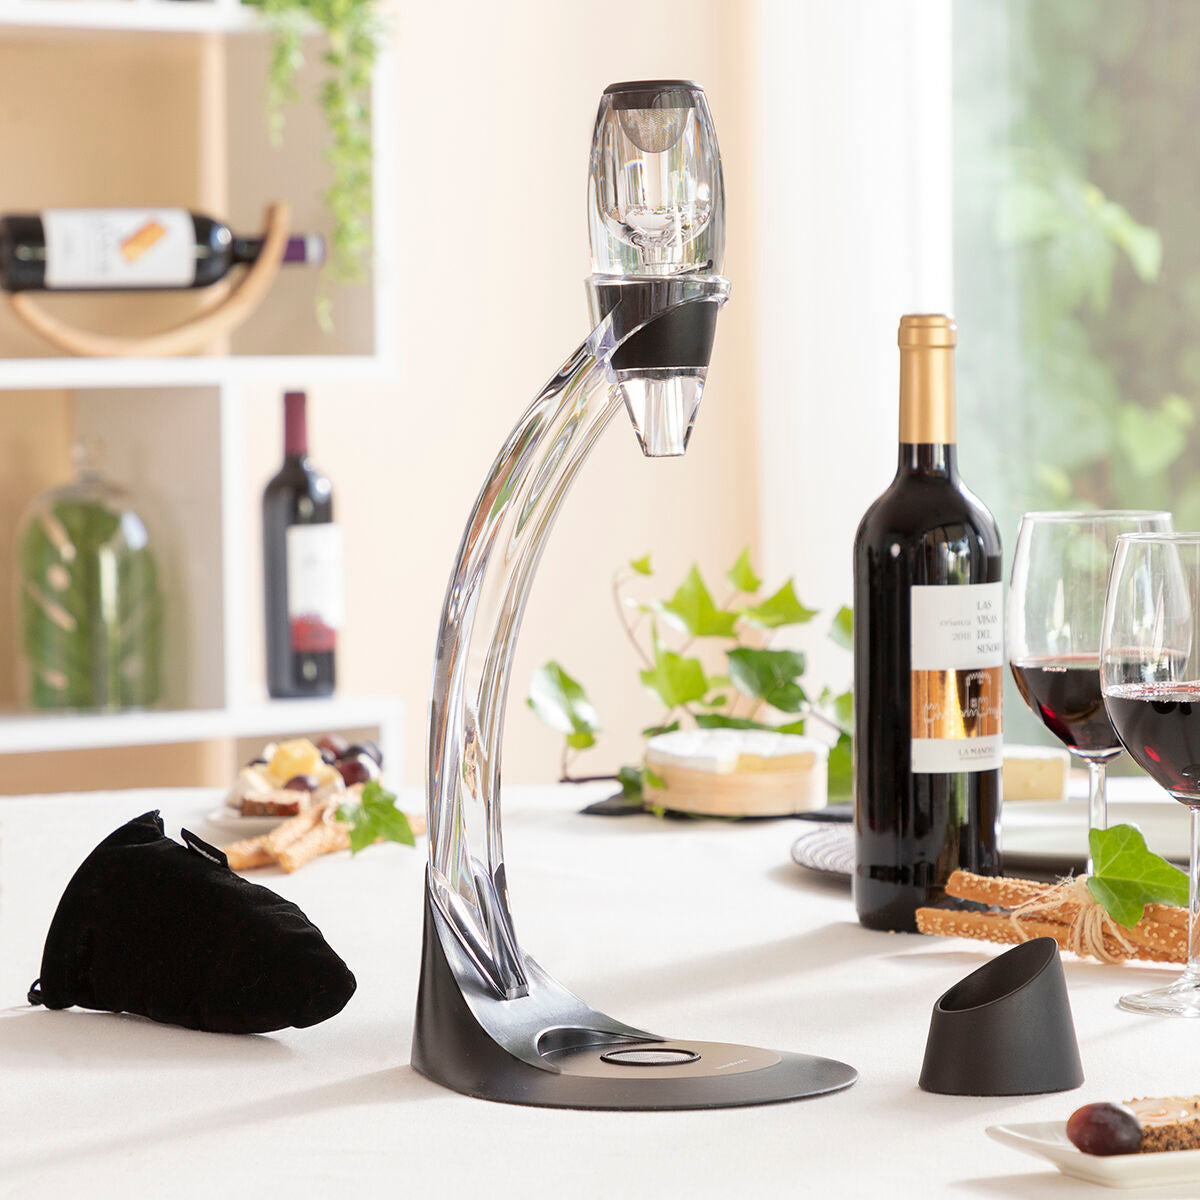 Professional Wine Aerator with Tower Stand and Non-Drip Base Winair InnovaGoods